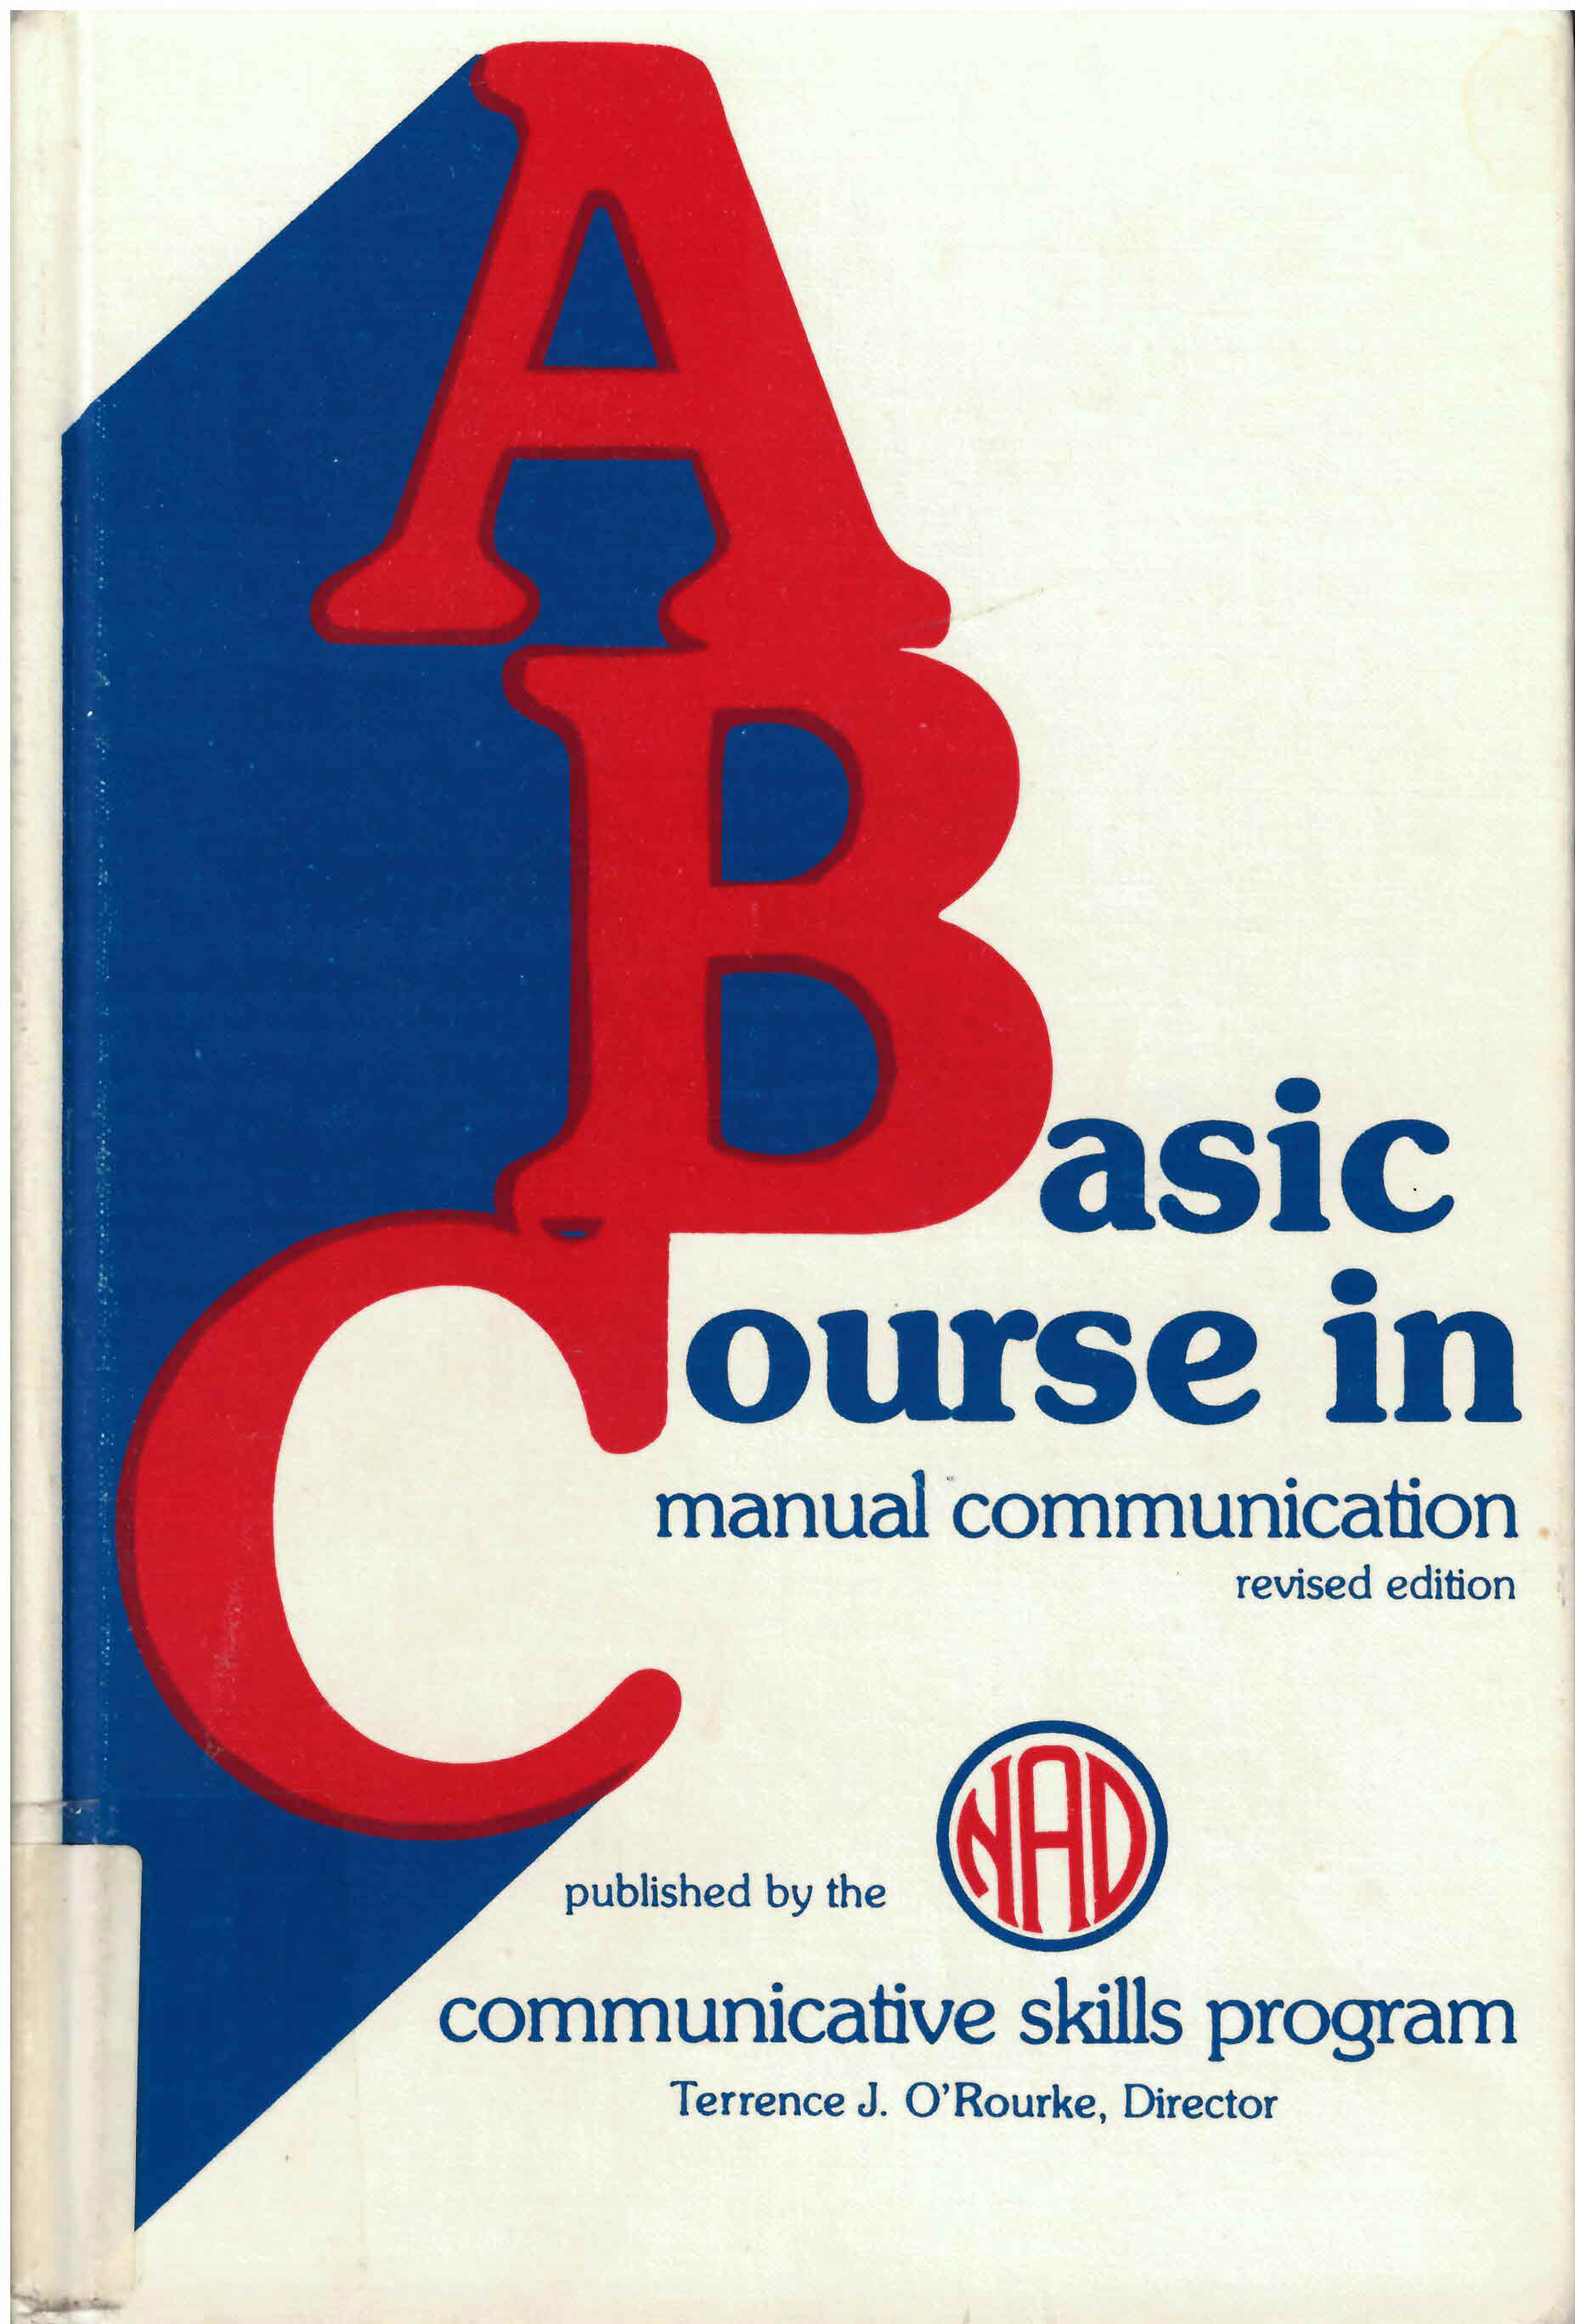 Basic course in manual communication